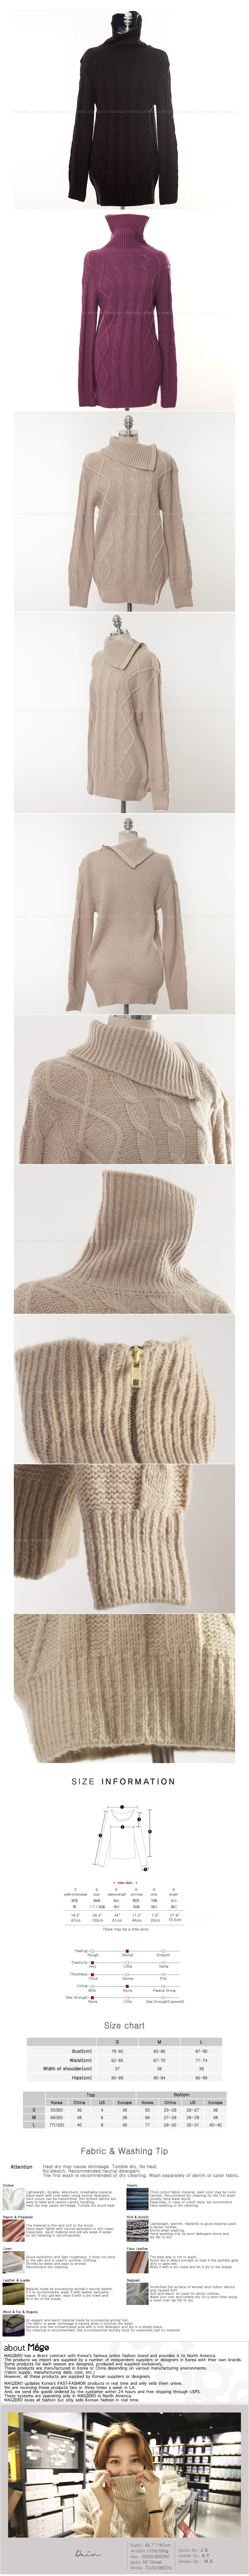 [Limited Quantity Sale] Turtleneck-Zip Cable Knit Wool Blend Sweater Beige One Size(S-M)